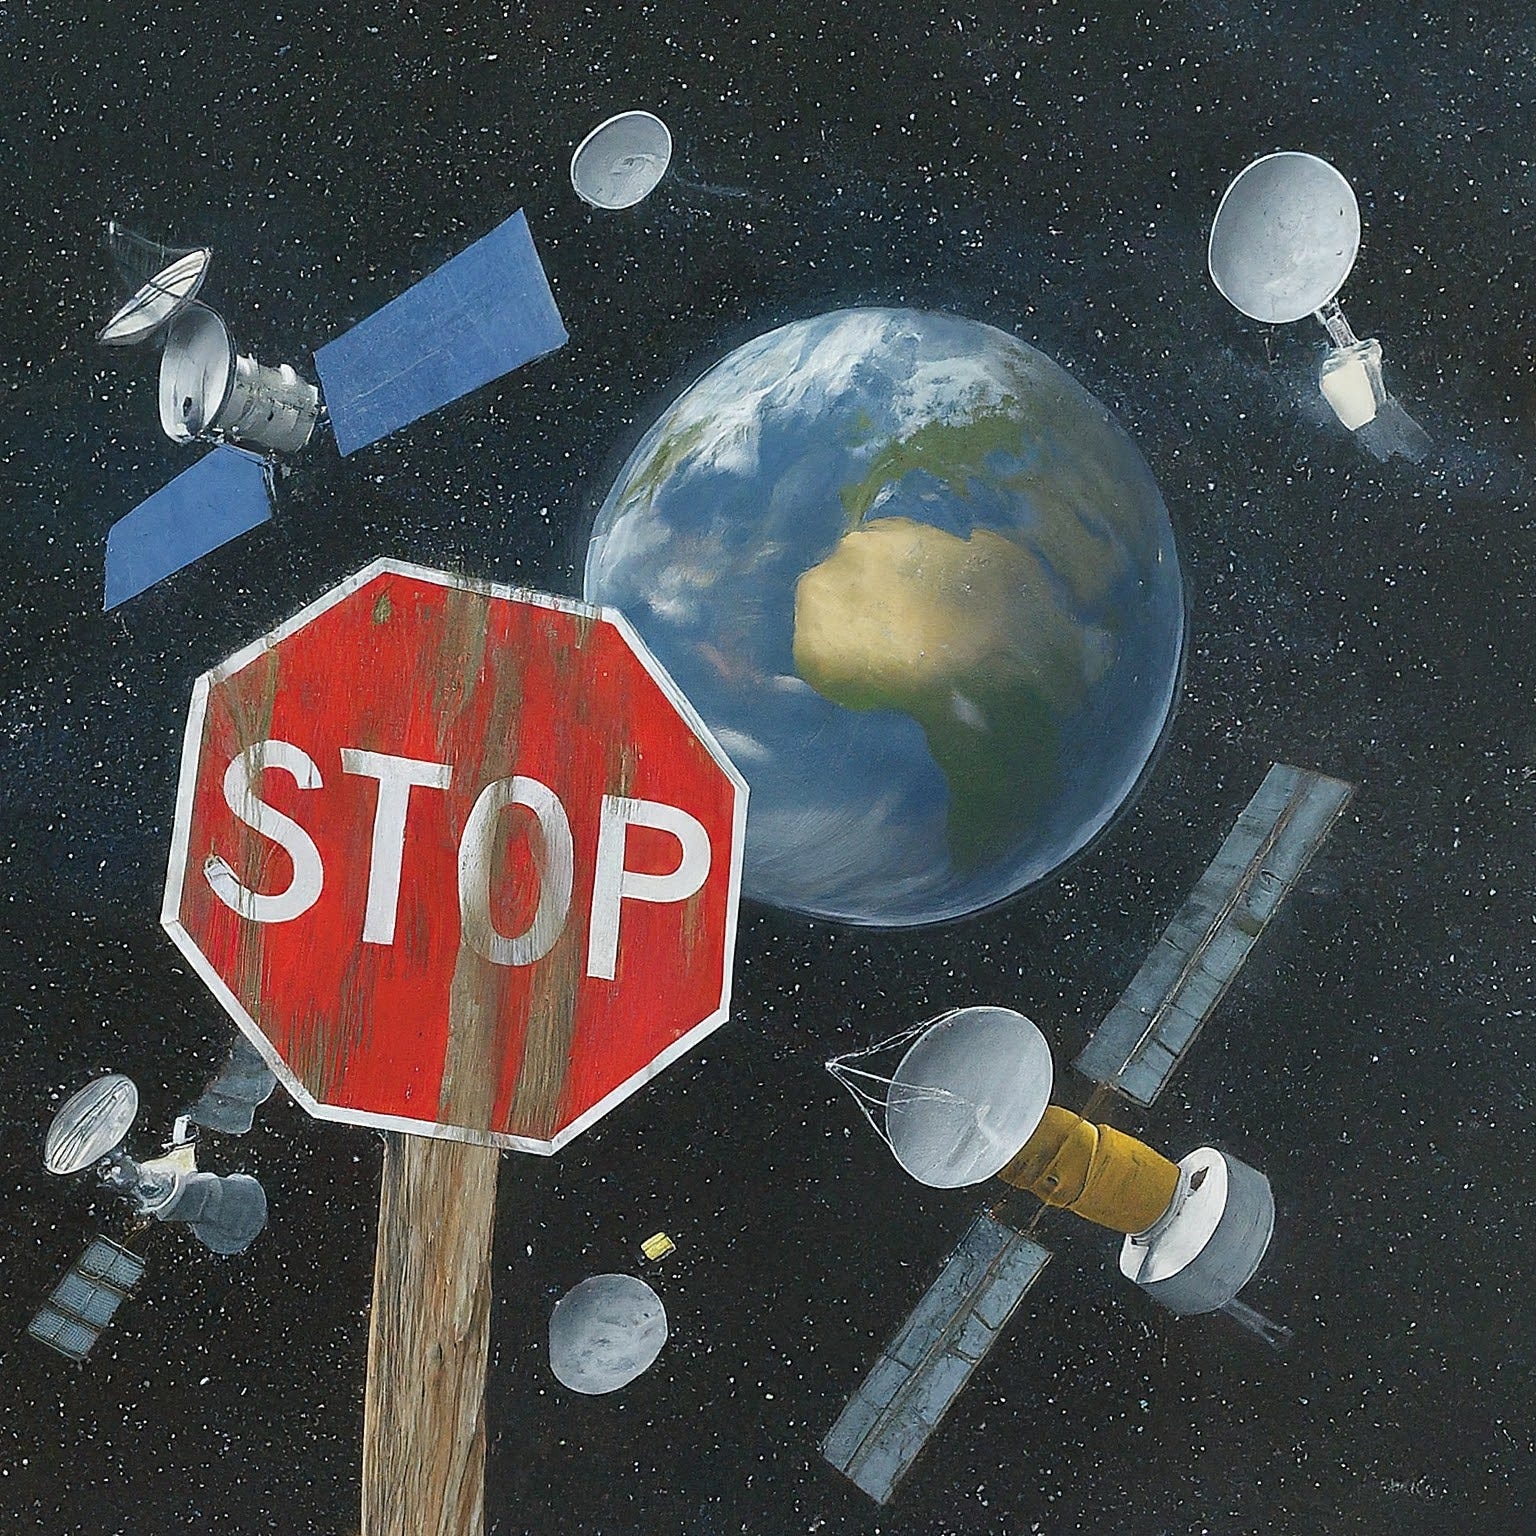 Space Junk: The Emerging Threat and Innovative Solutions